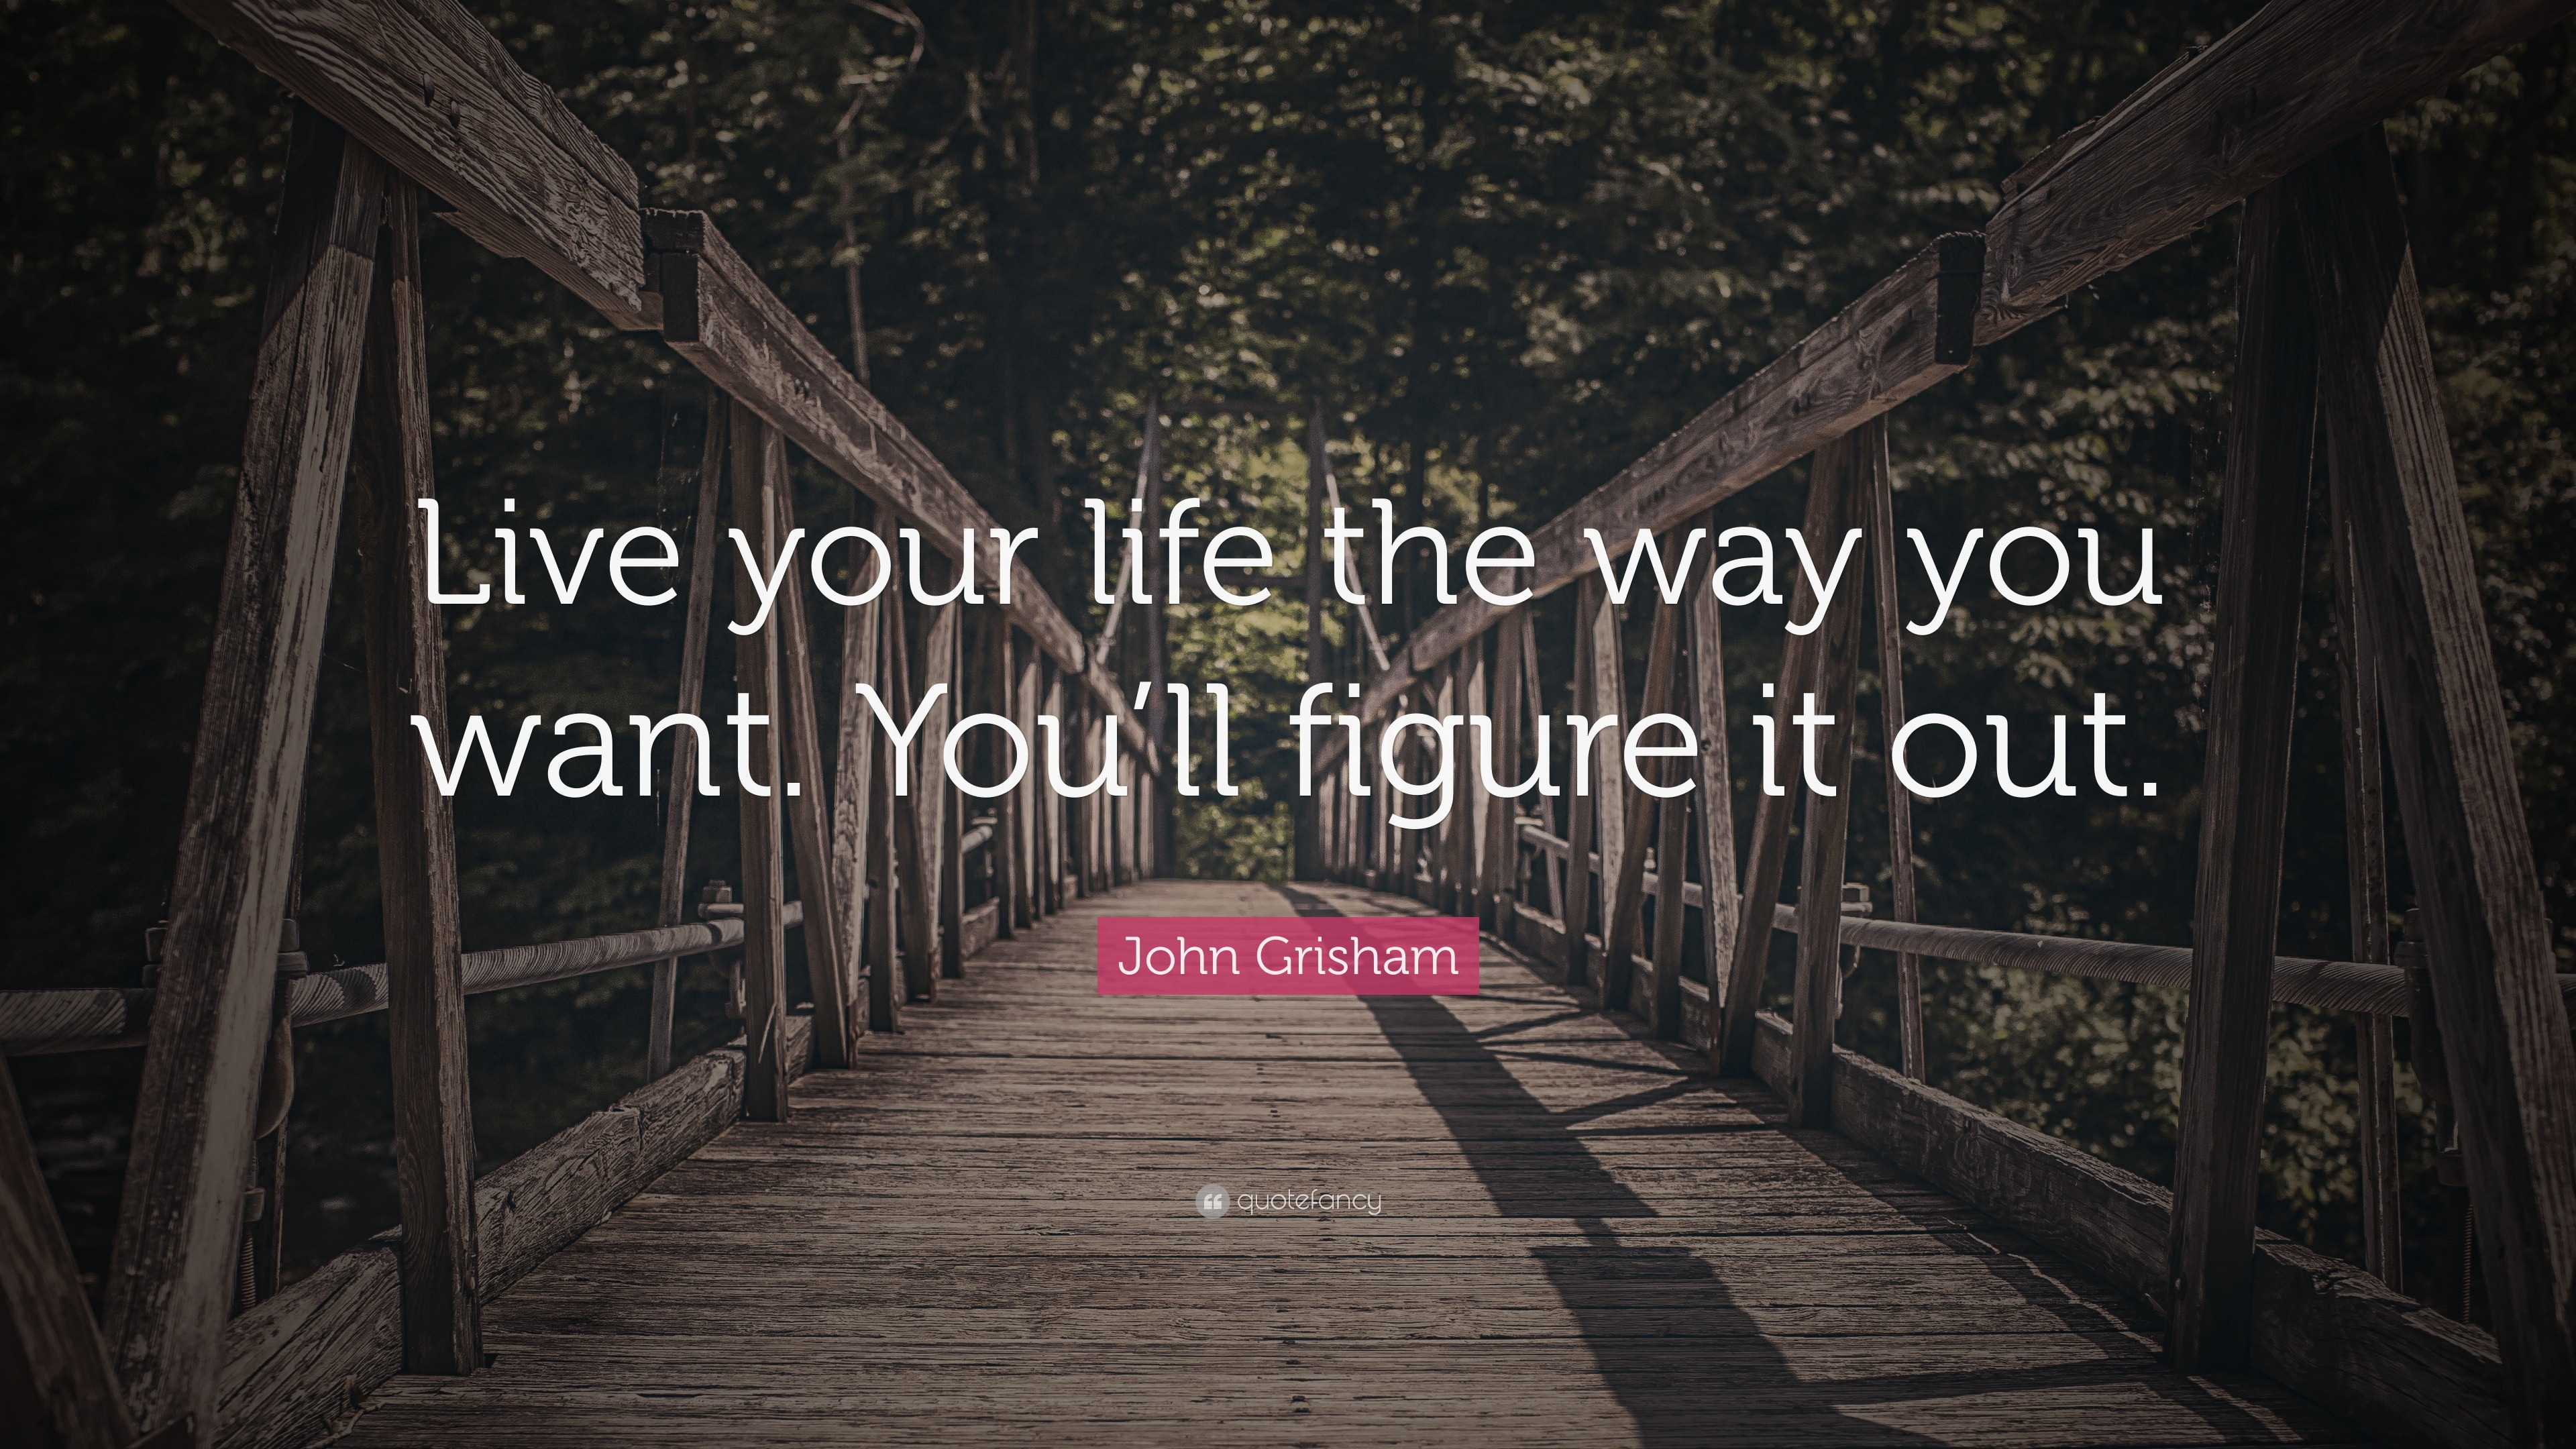 John Grisham Quote “Live your life the way you want You ll